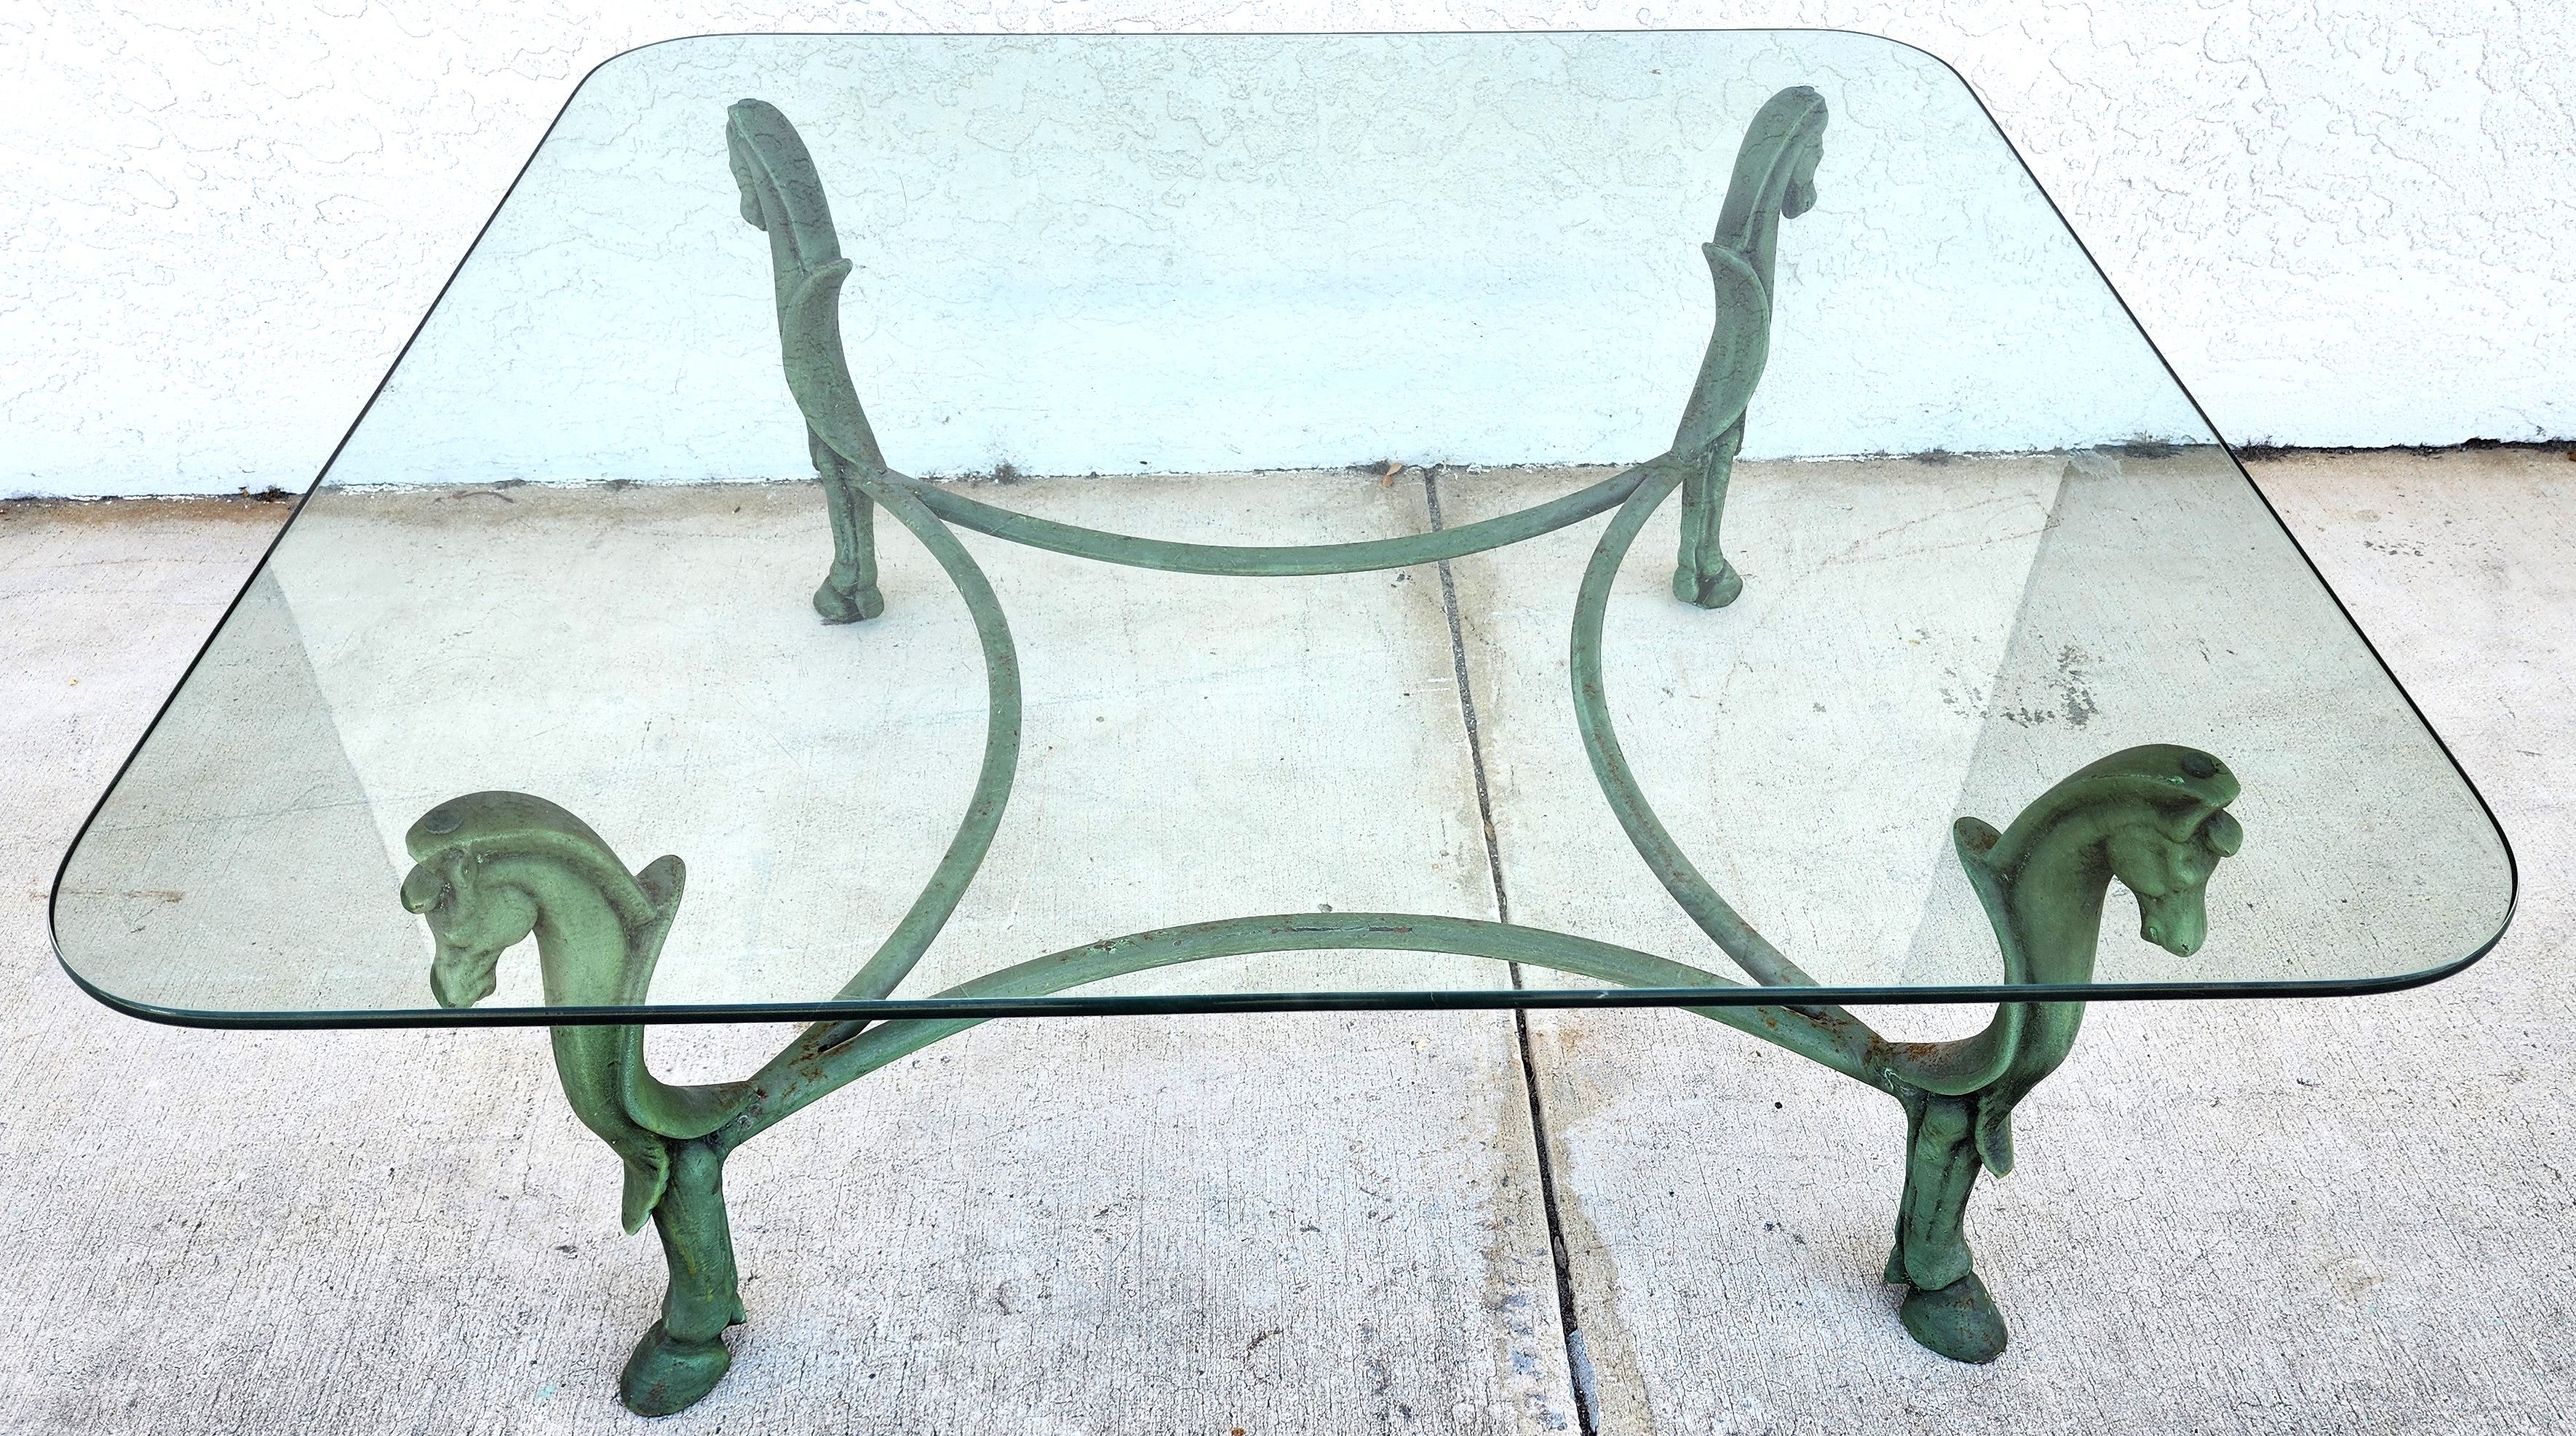 For FULL item description click on CONTINUE READING at the bottom of this page.

Offering One Of Our Recent Palm Beach Estate Fine Furniture Acquisitions Of A
Vintage Patinated Iron Horse Head and Hoof Footed Coffee Table Patinated

We have many